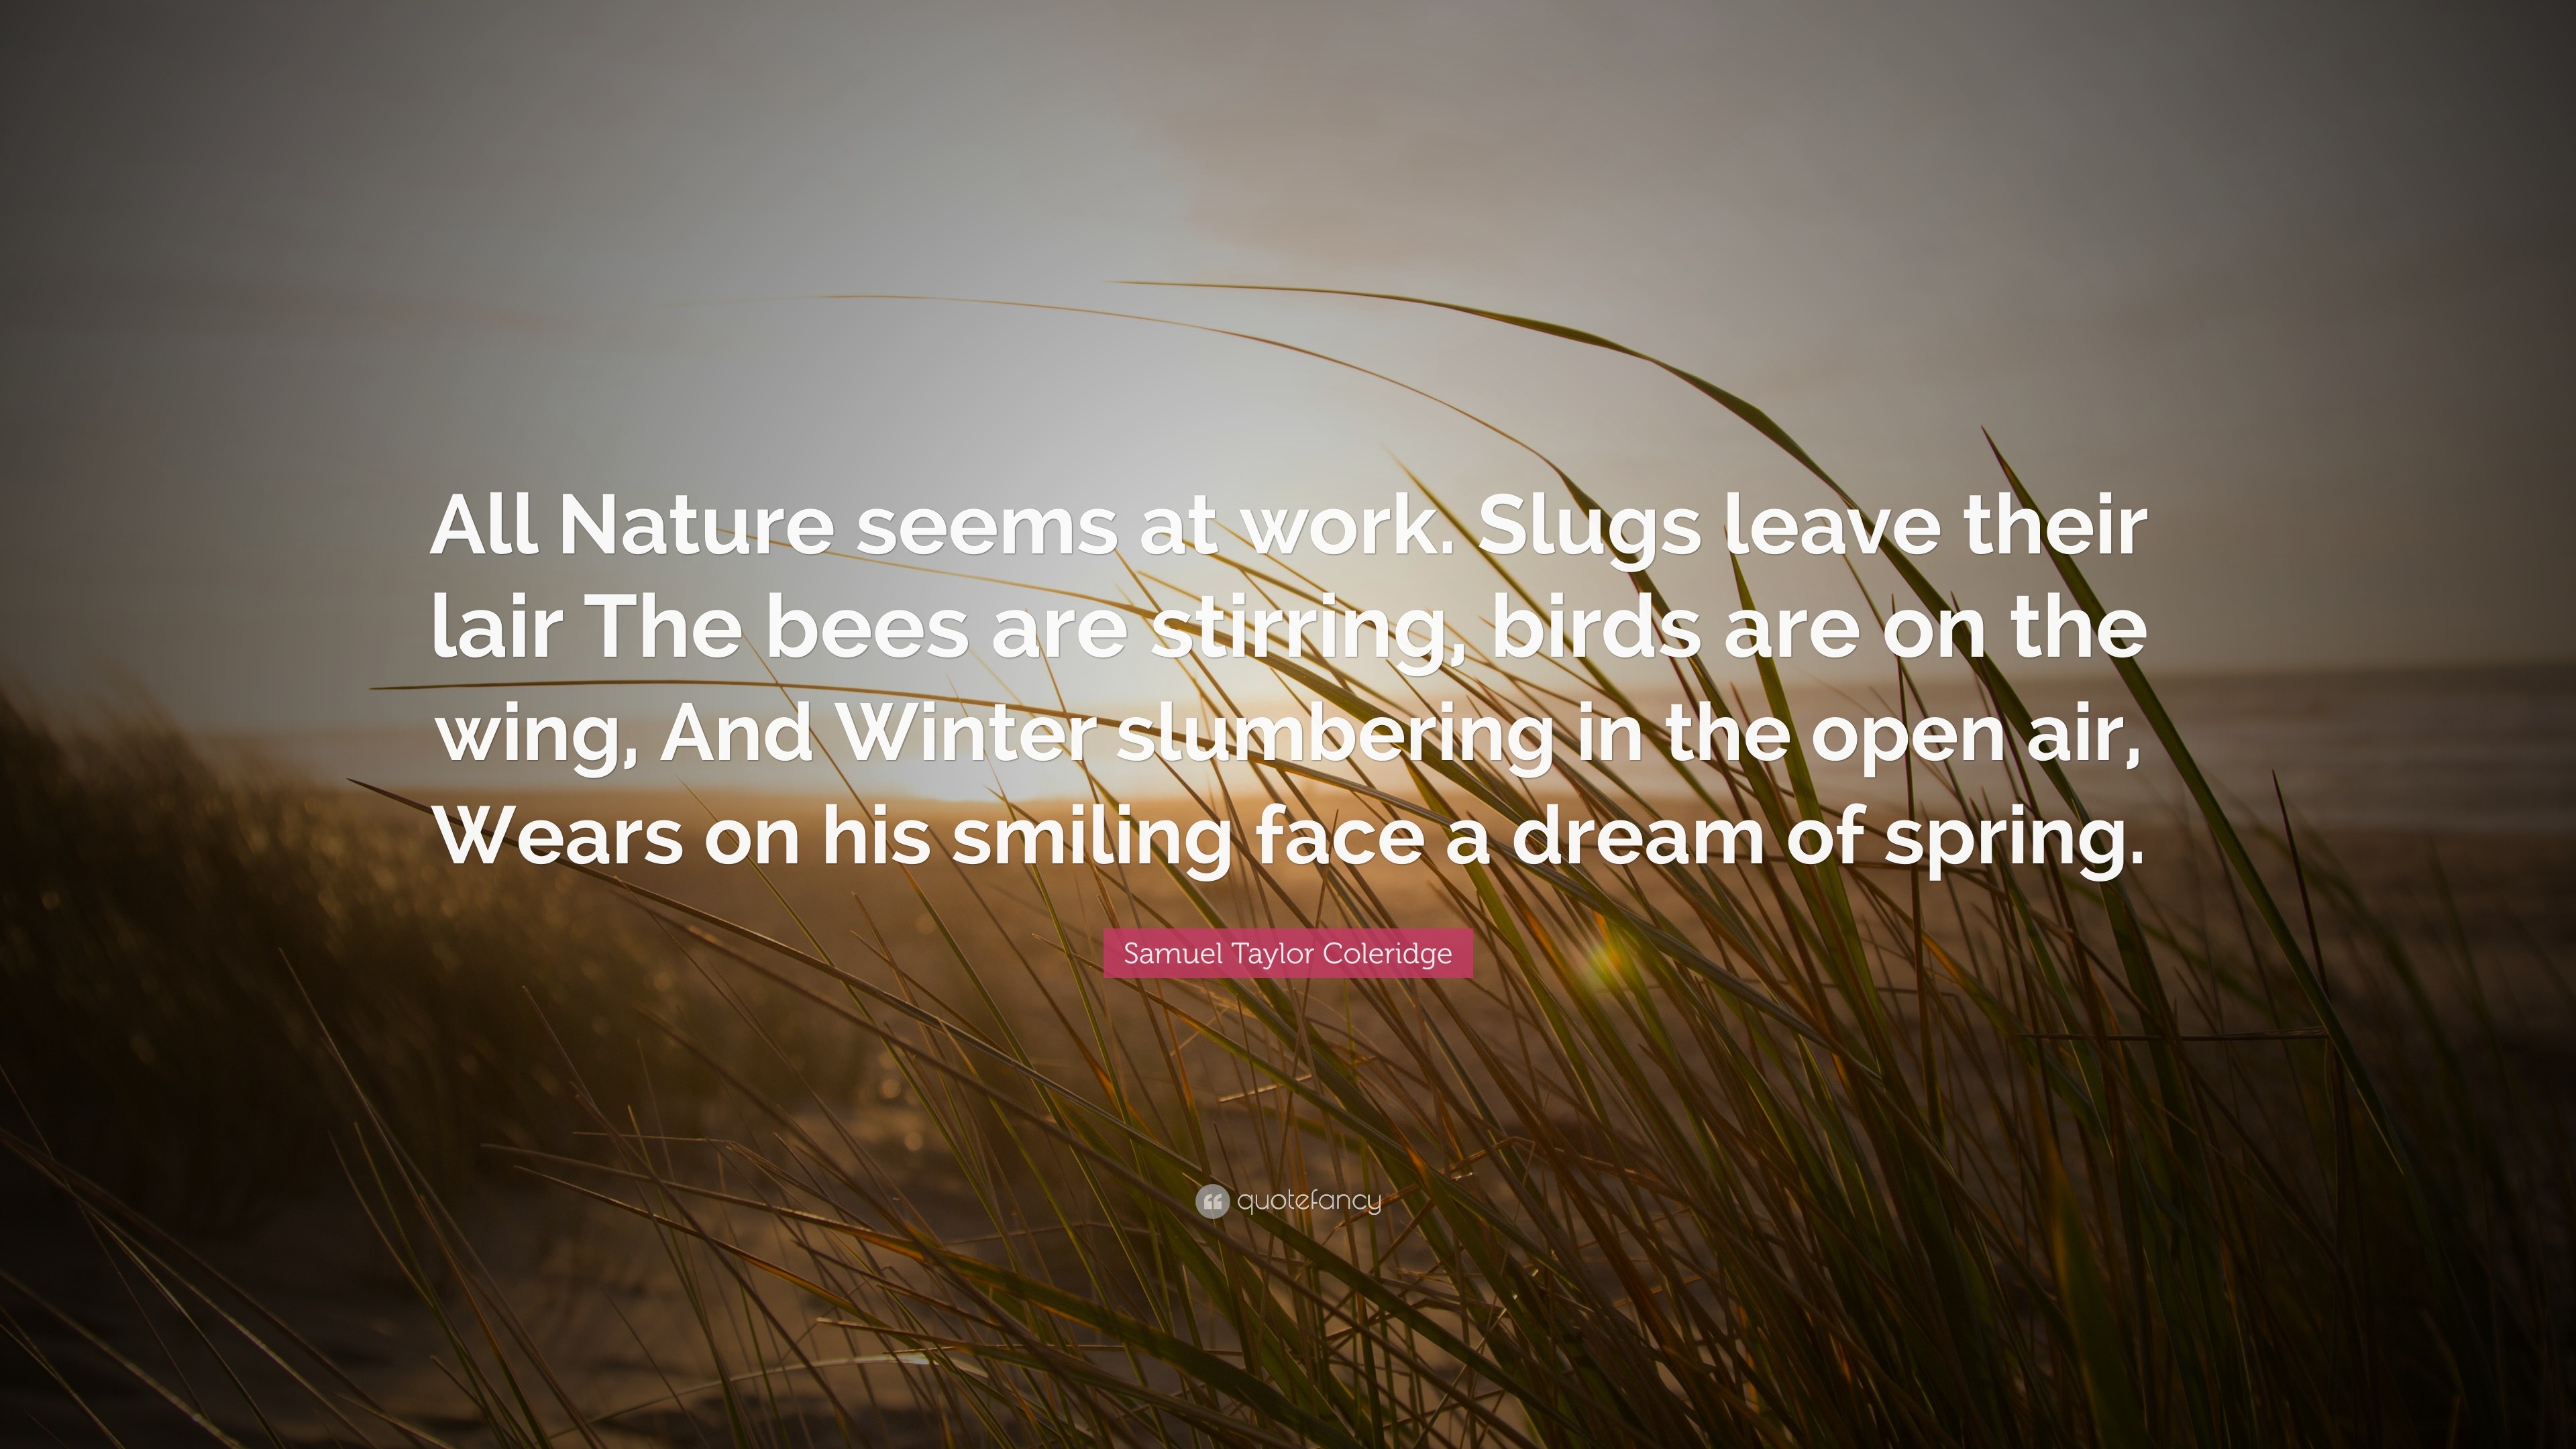 Samuel Taylor Coleridge Quote: “All Nature seems at work. Slugs leave their lair The ...3840 x 2160